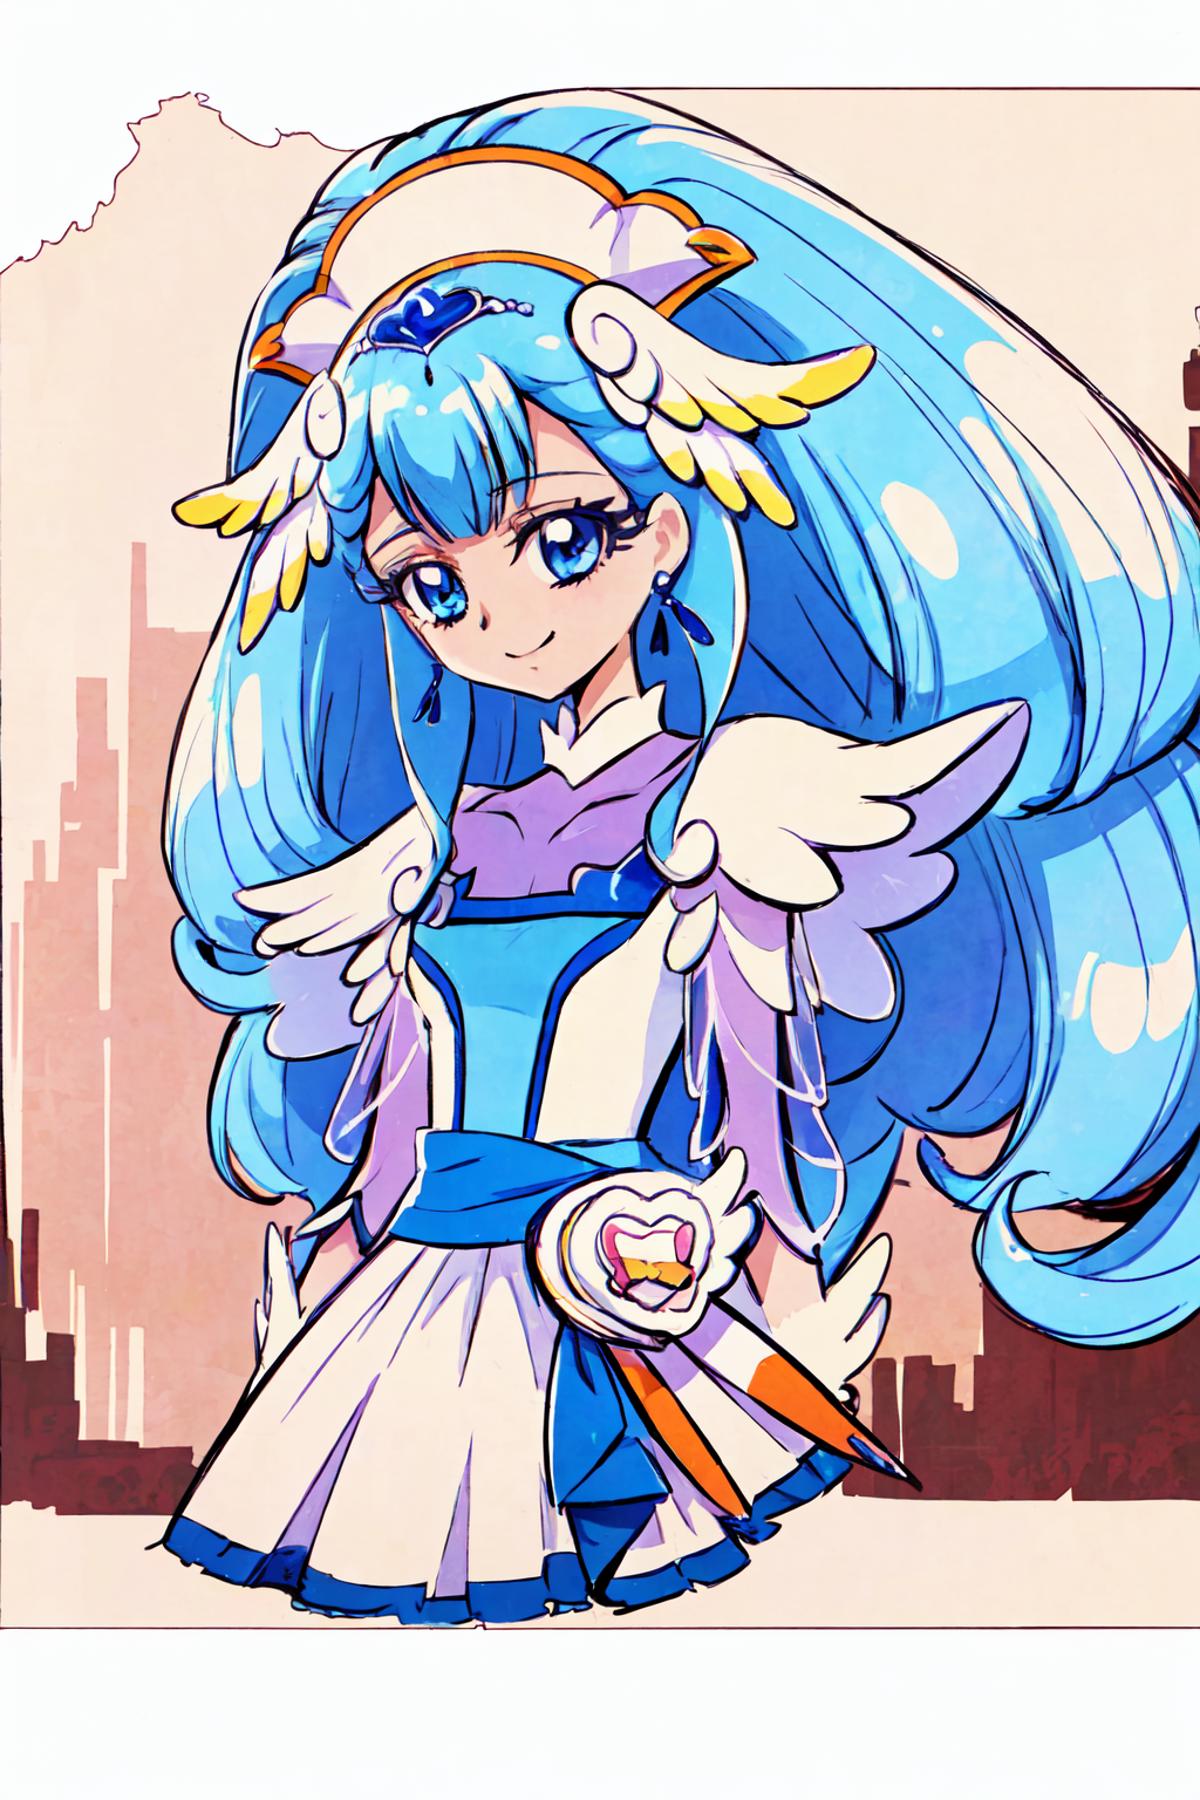 Cure Ange (HUGtto! Pretty Cure) HUGっと！プリキュア キュアアンジュ image by UnknownNo3